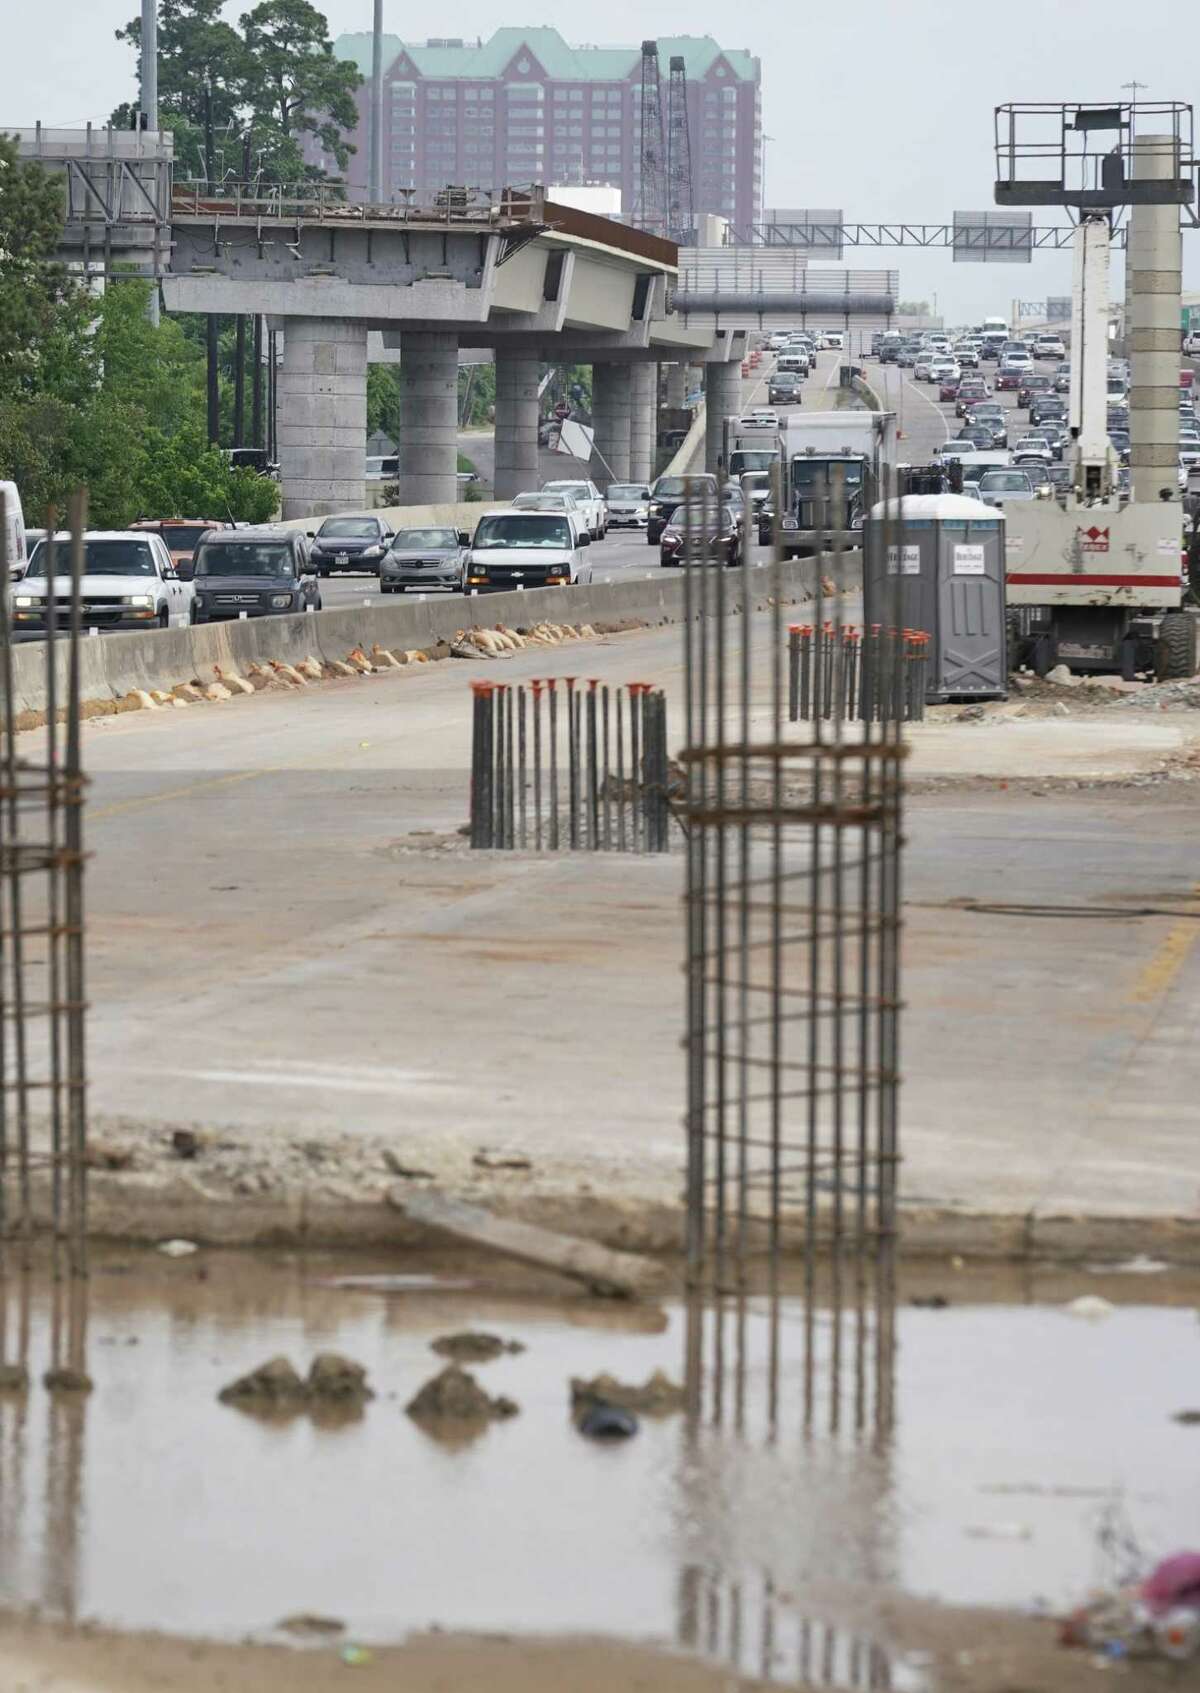 Crews will extend the Loop 610 busway overpass parallel to the freeway, to two center lanes along the loop, shown May 23. The project will eventually link Metro's Northwest Transit Center to Post Oak, where dedicated bus lanes are being built.